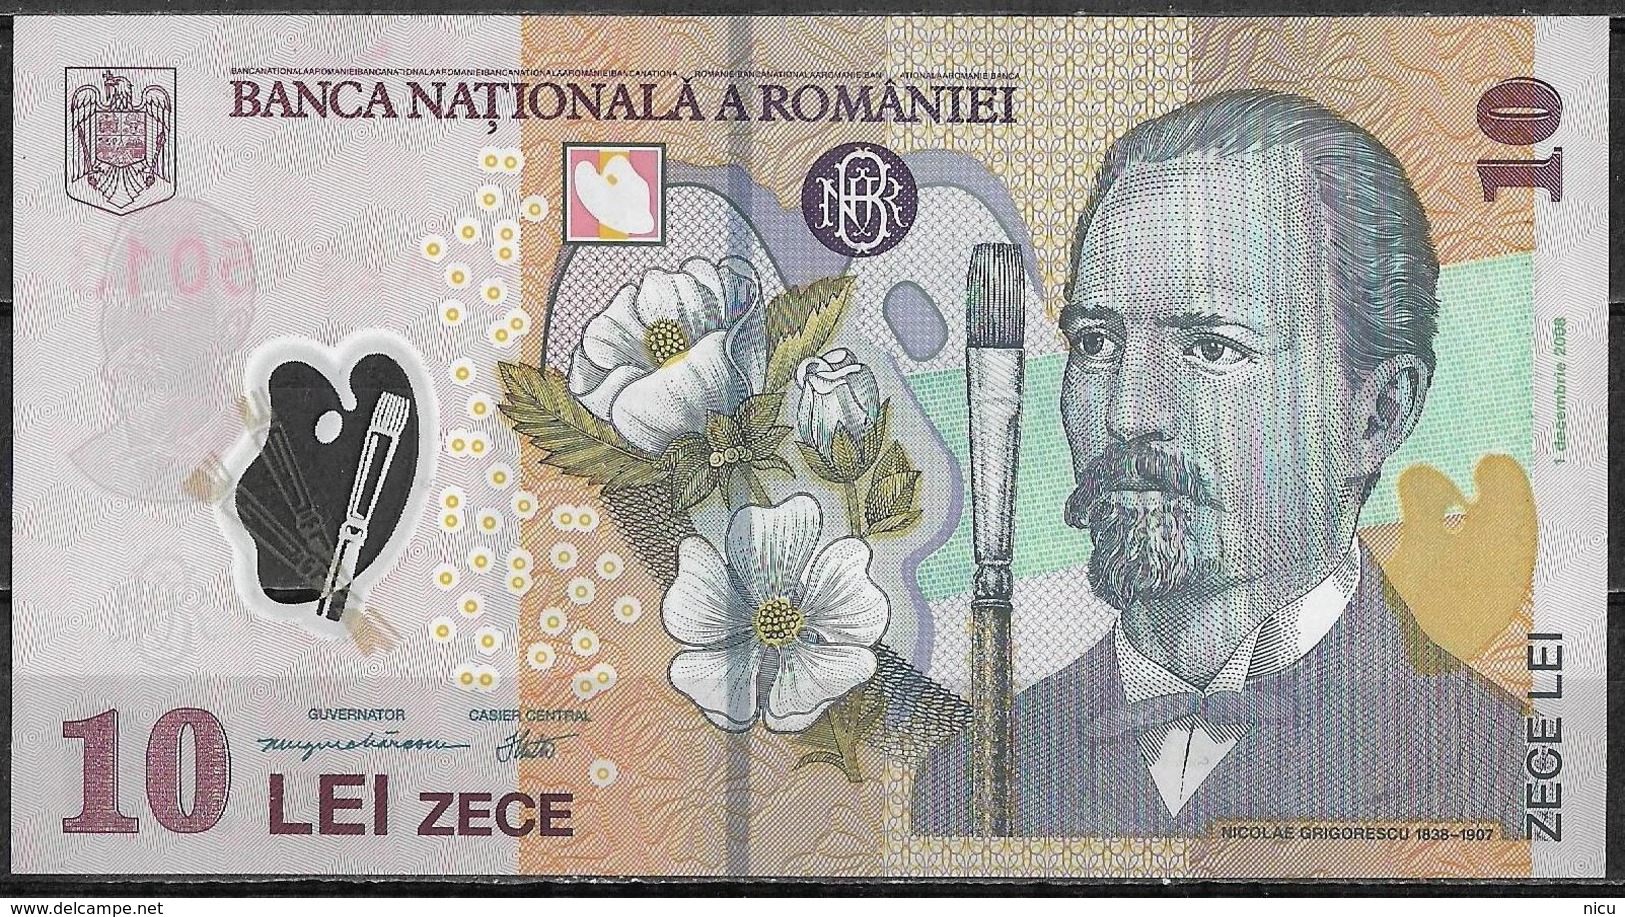 10 LEI BANKNOTE FROM ROMANIA EDITED IN DECEMBER 1st 2008 - Rumania